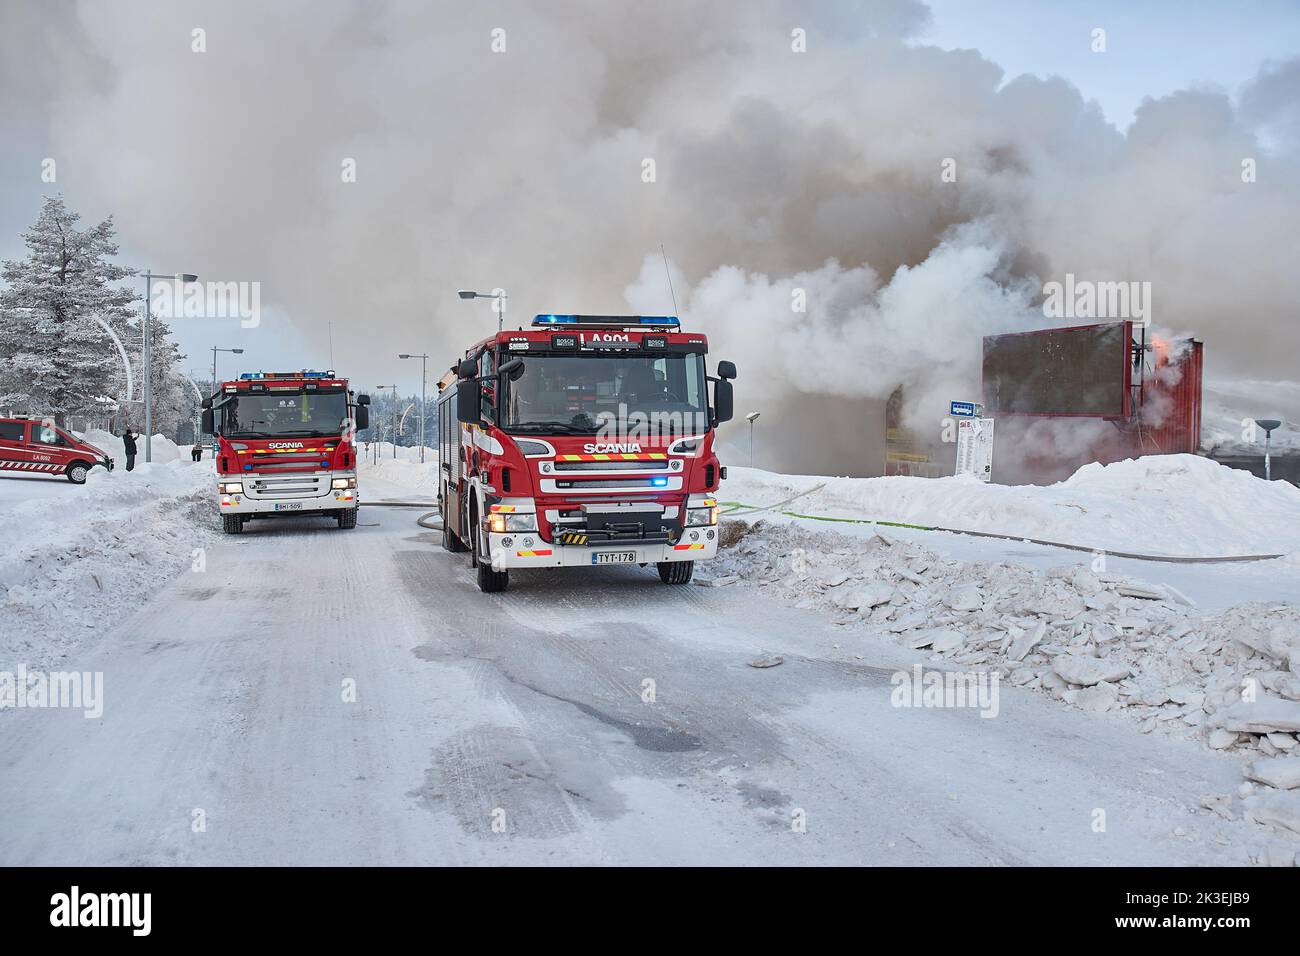 Fire trucks for emergency response at a burning building in Finland Stock Photo